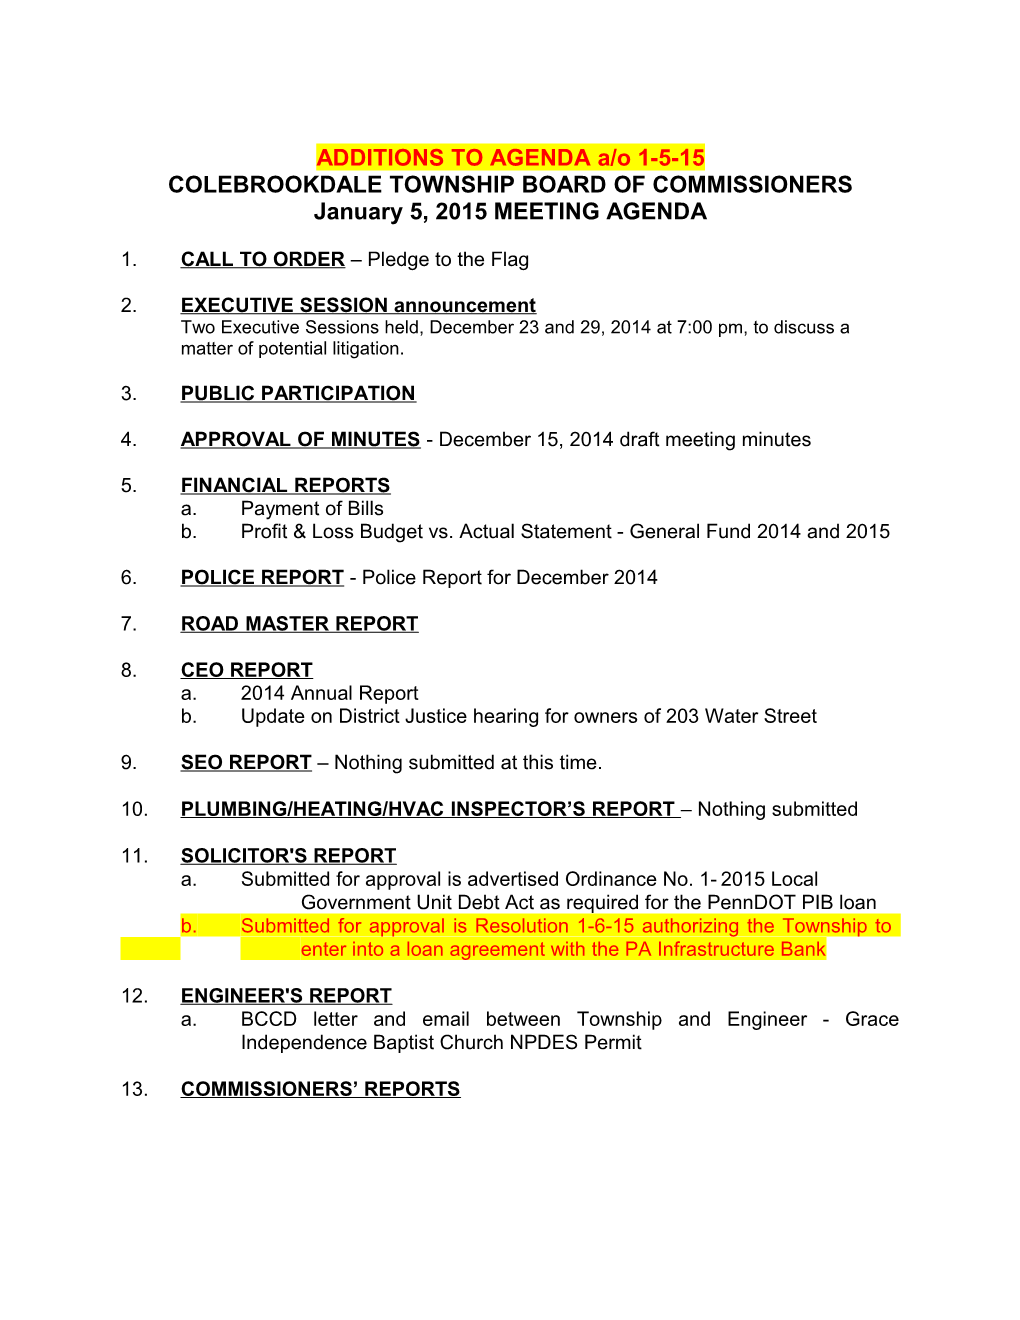 Colebrookdale Township Board of Commissioners s2